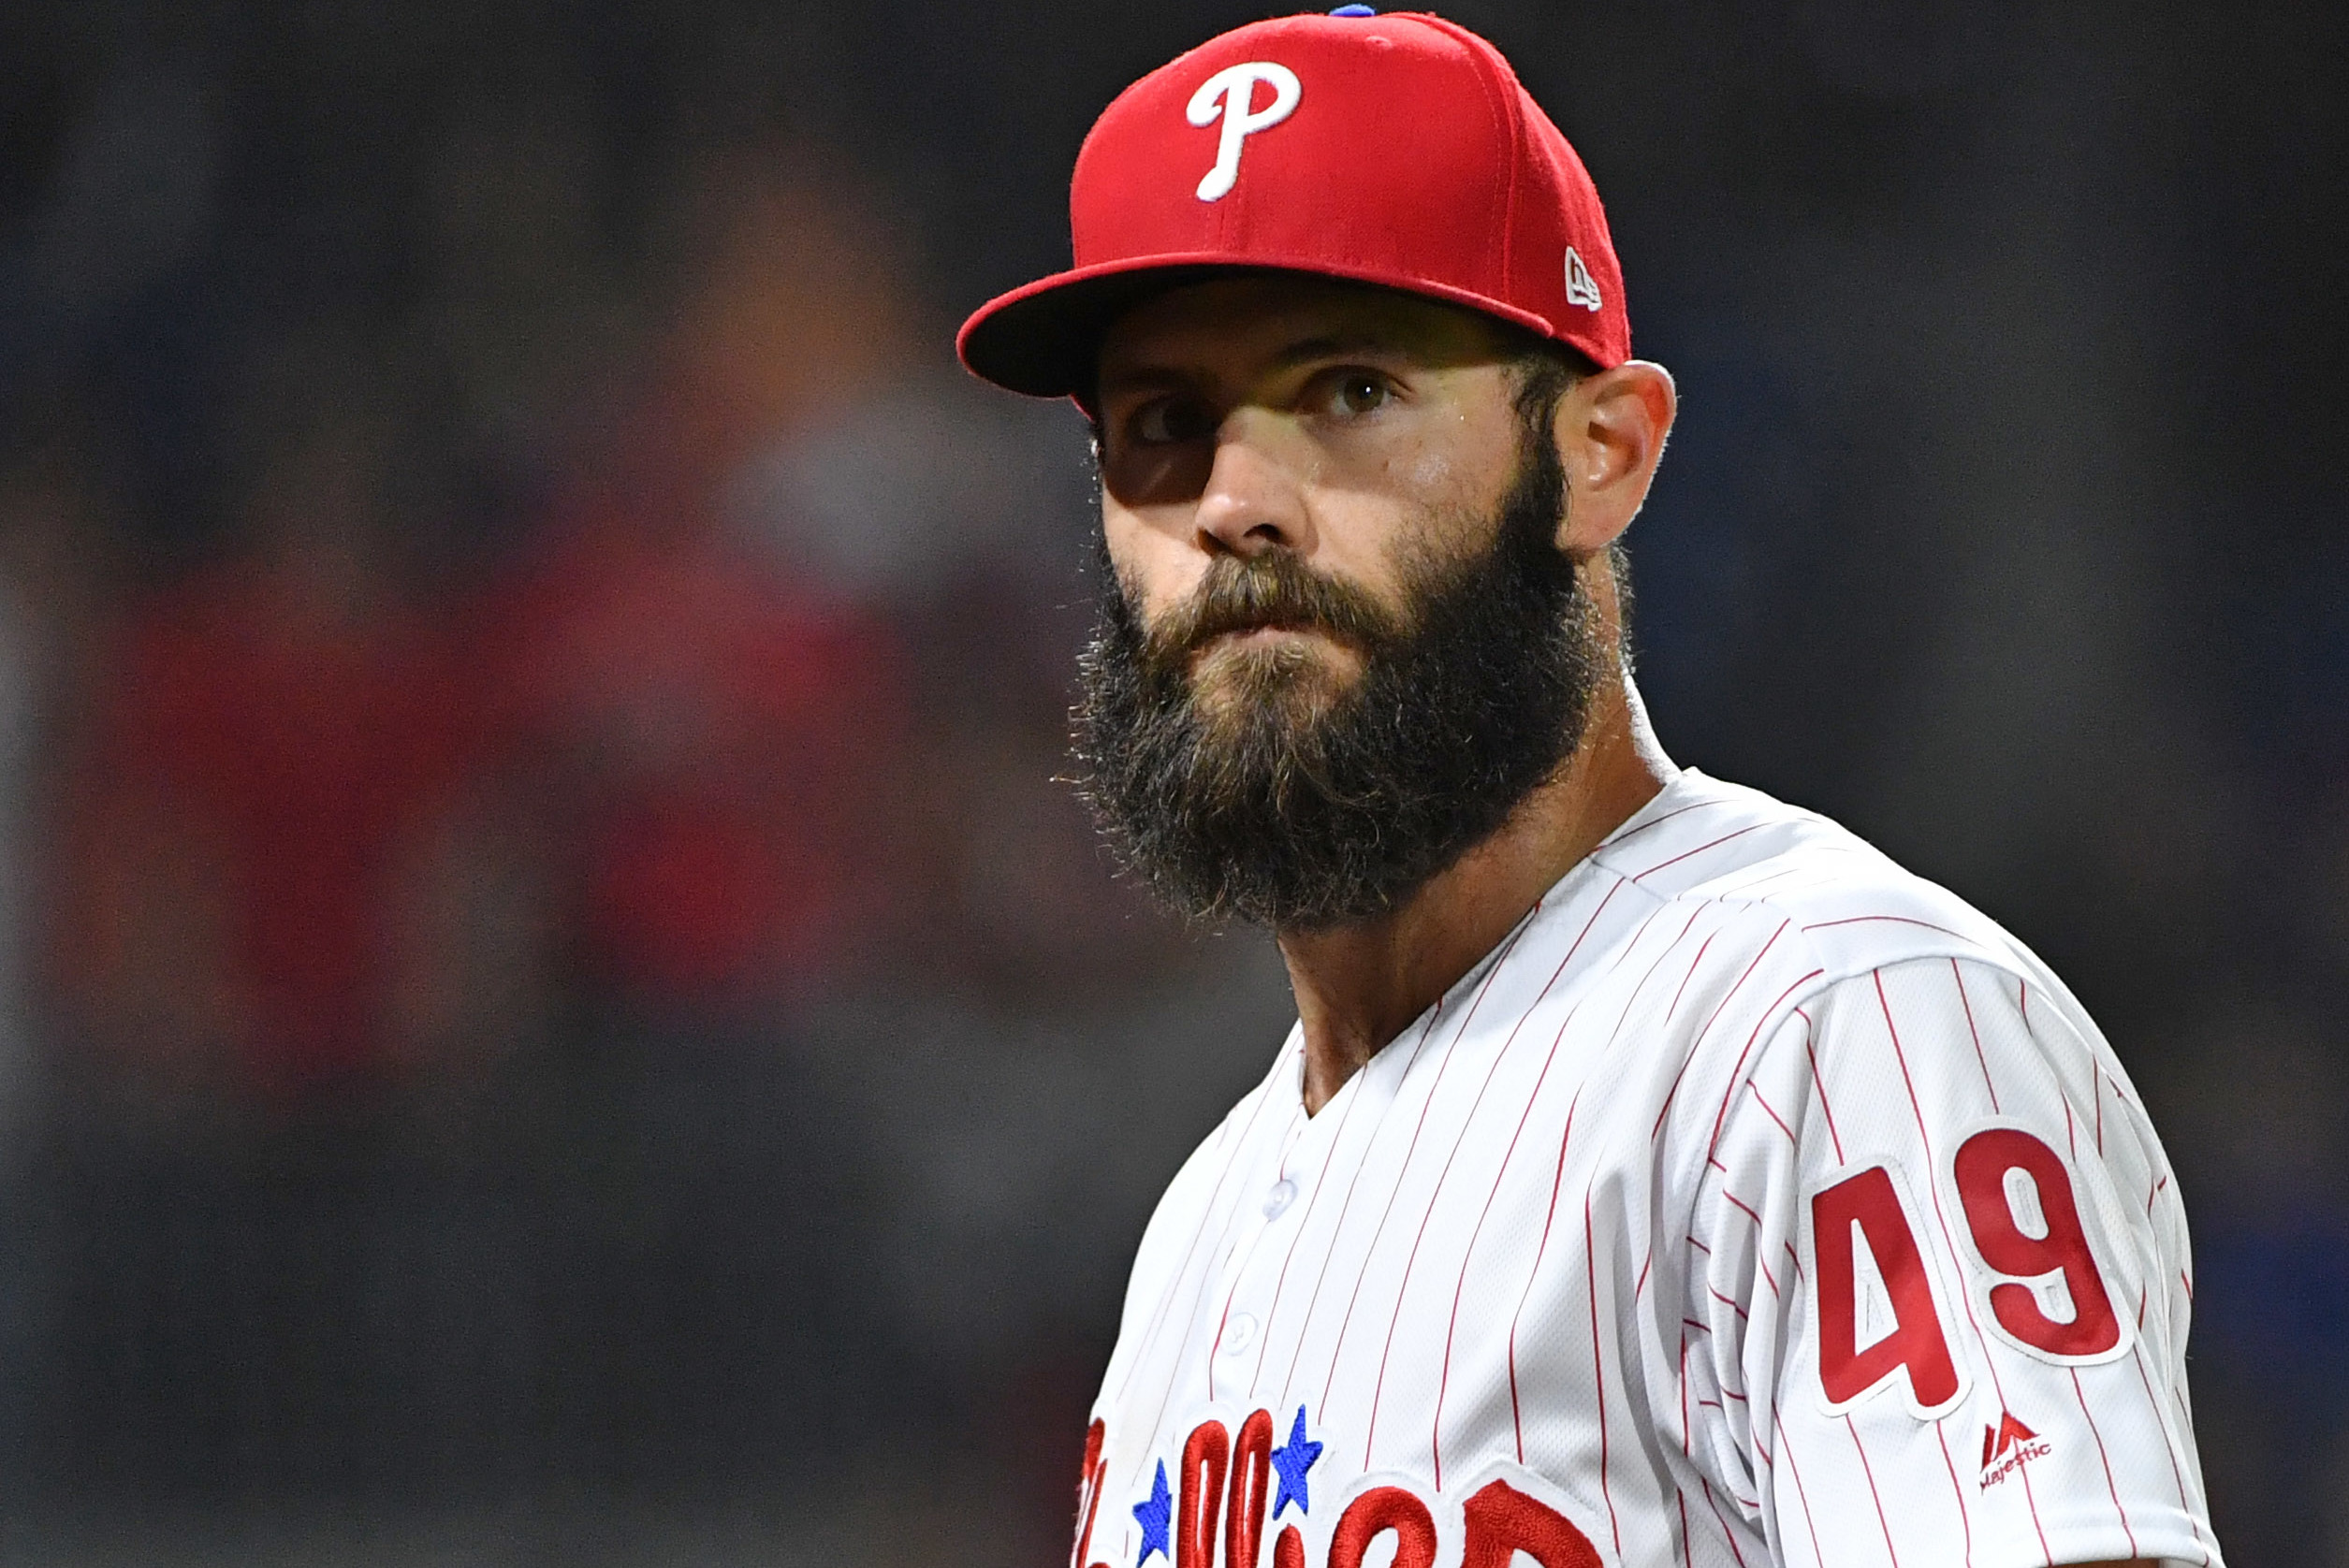 Jake Arrieta shaved his beard off and he looks like a totally different dude